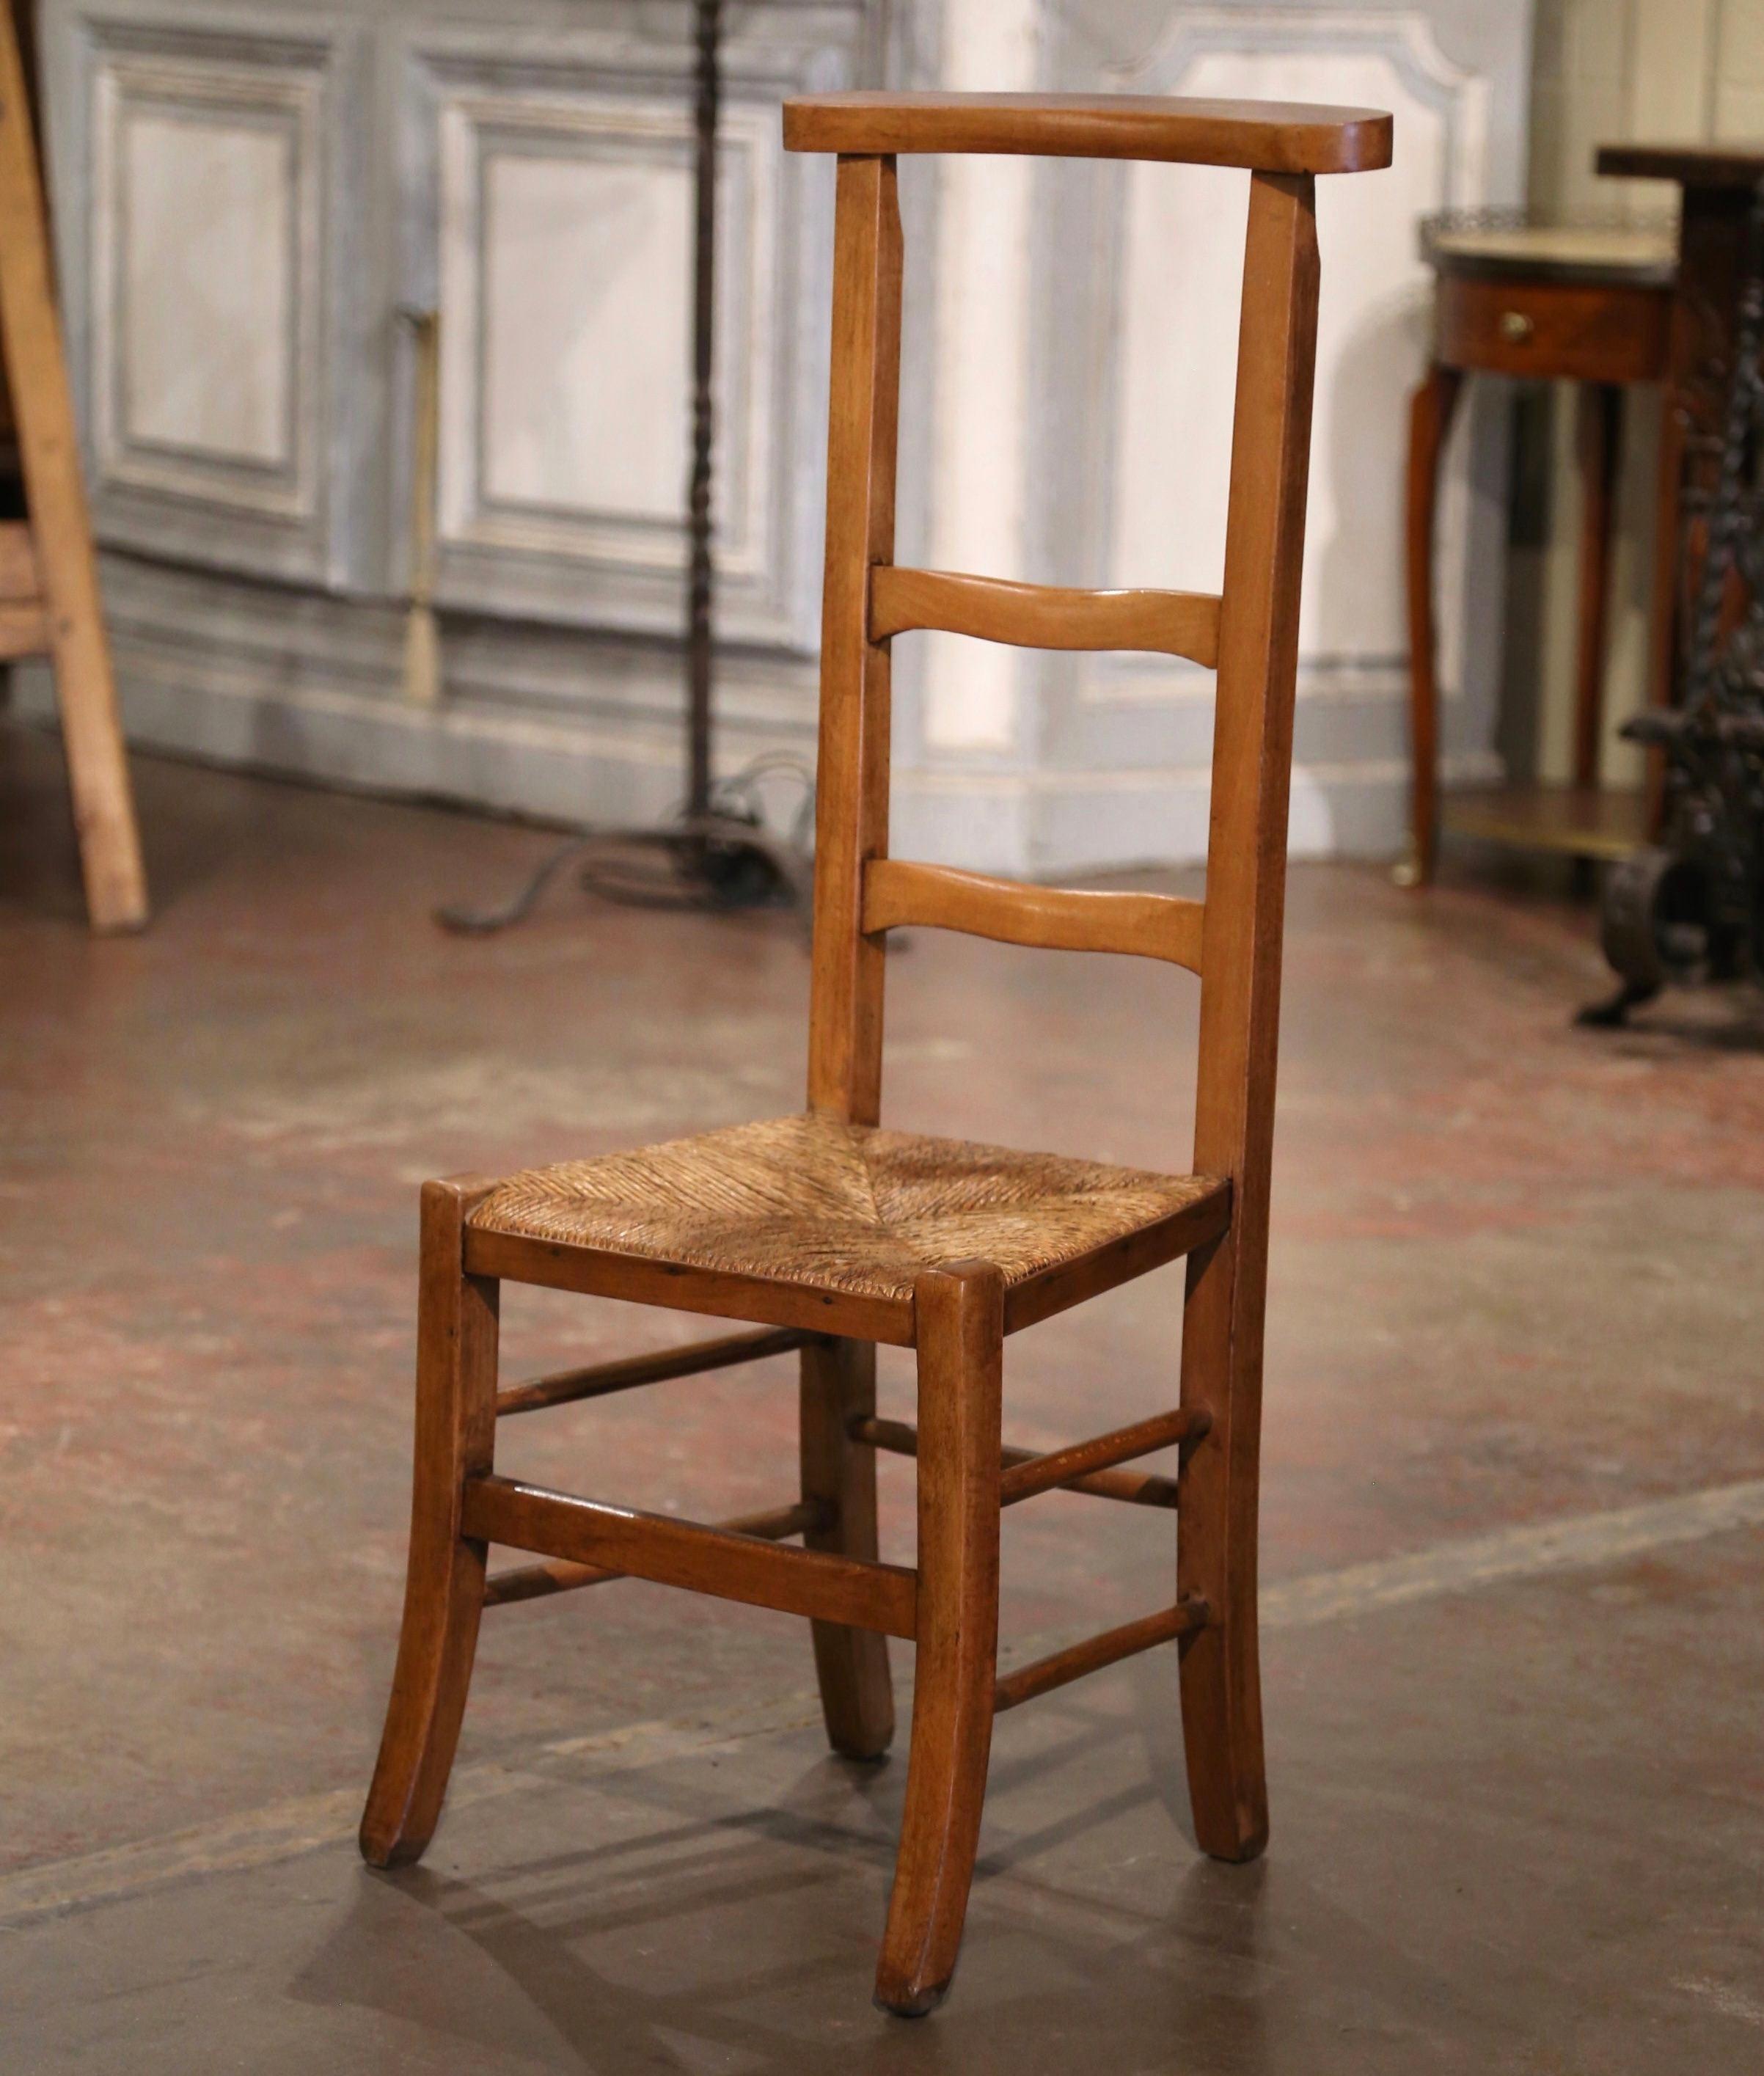 Place this elegant antique prayer chair in a bedroom for your daily devotions. Created in Normandy, France circa 1880, the Prie-Dieu ( Pray God ), stands on curved legs joined by a double turned stretcher over a hand woven rush seat. The tall back